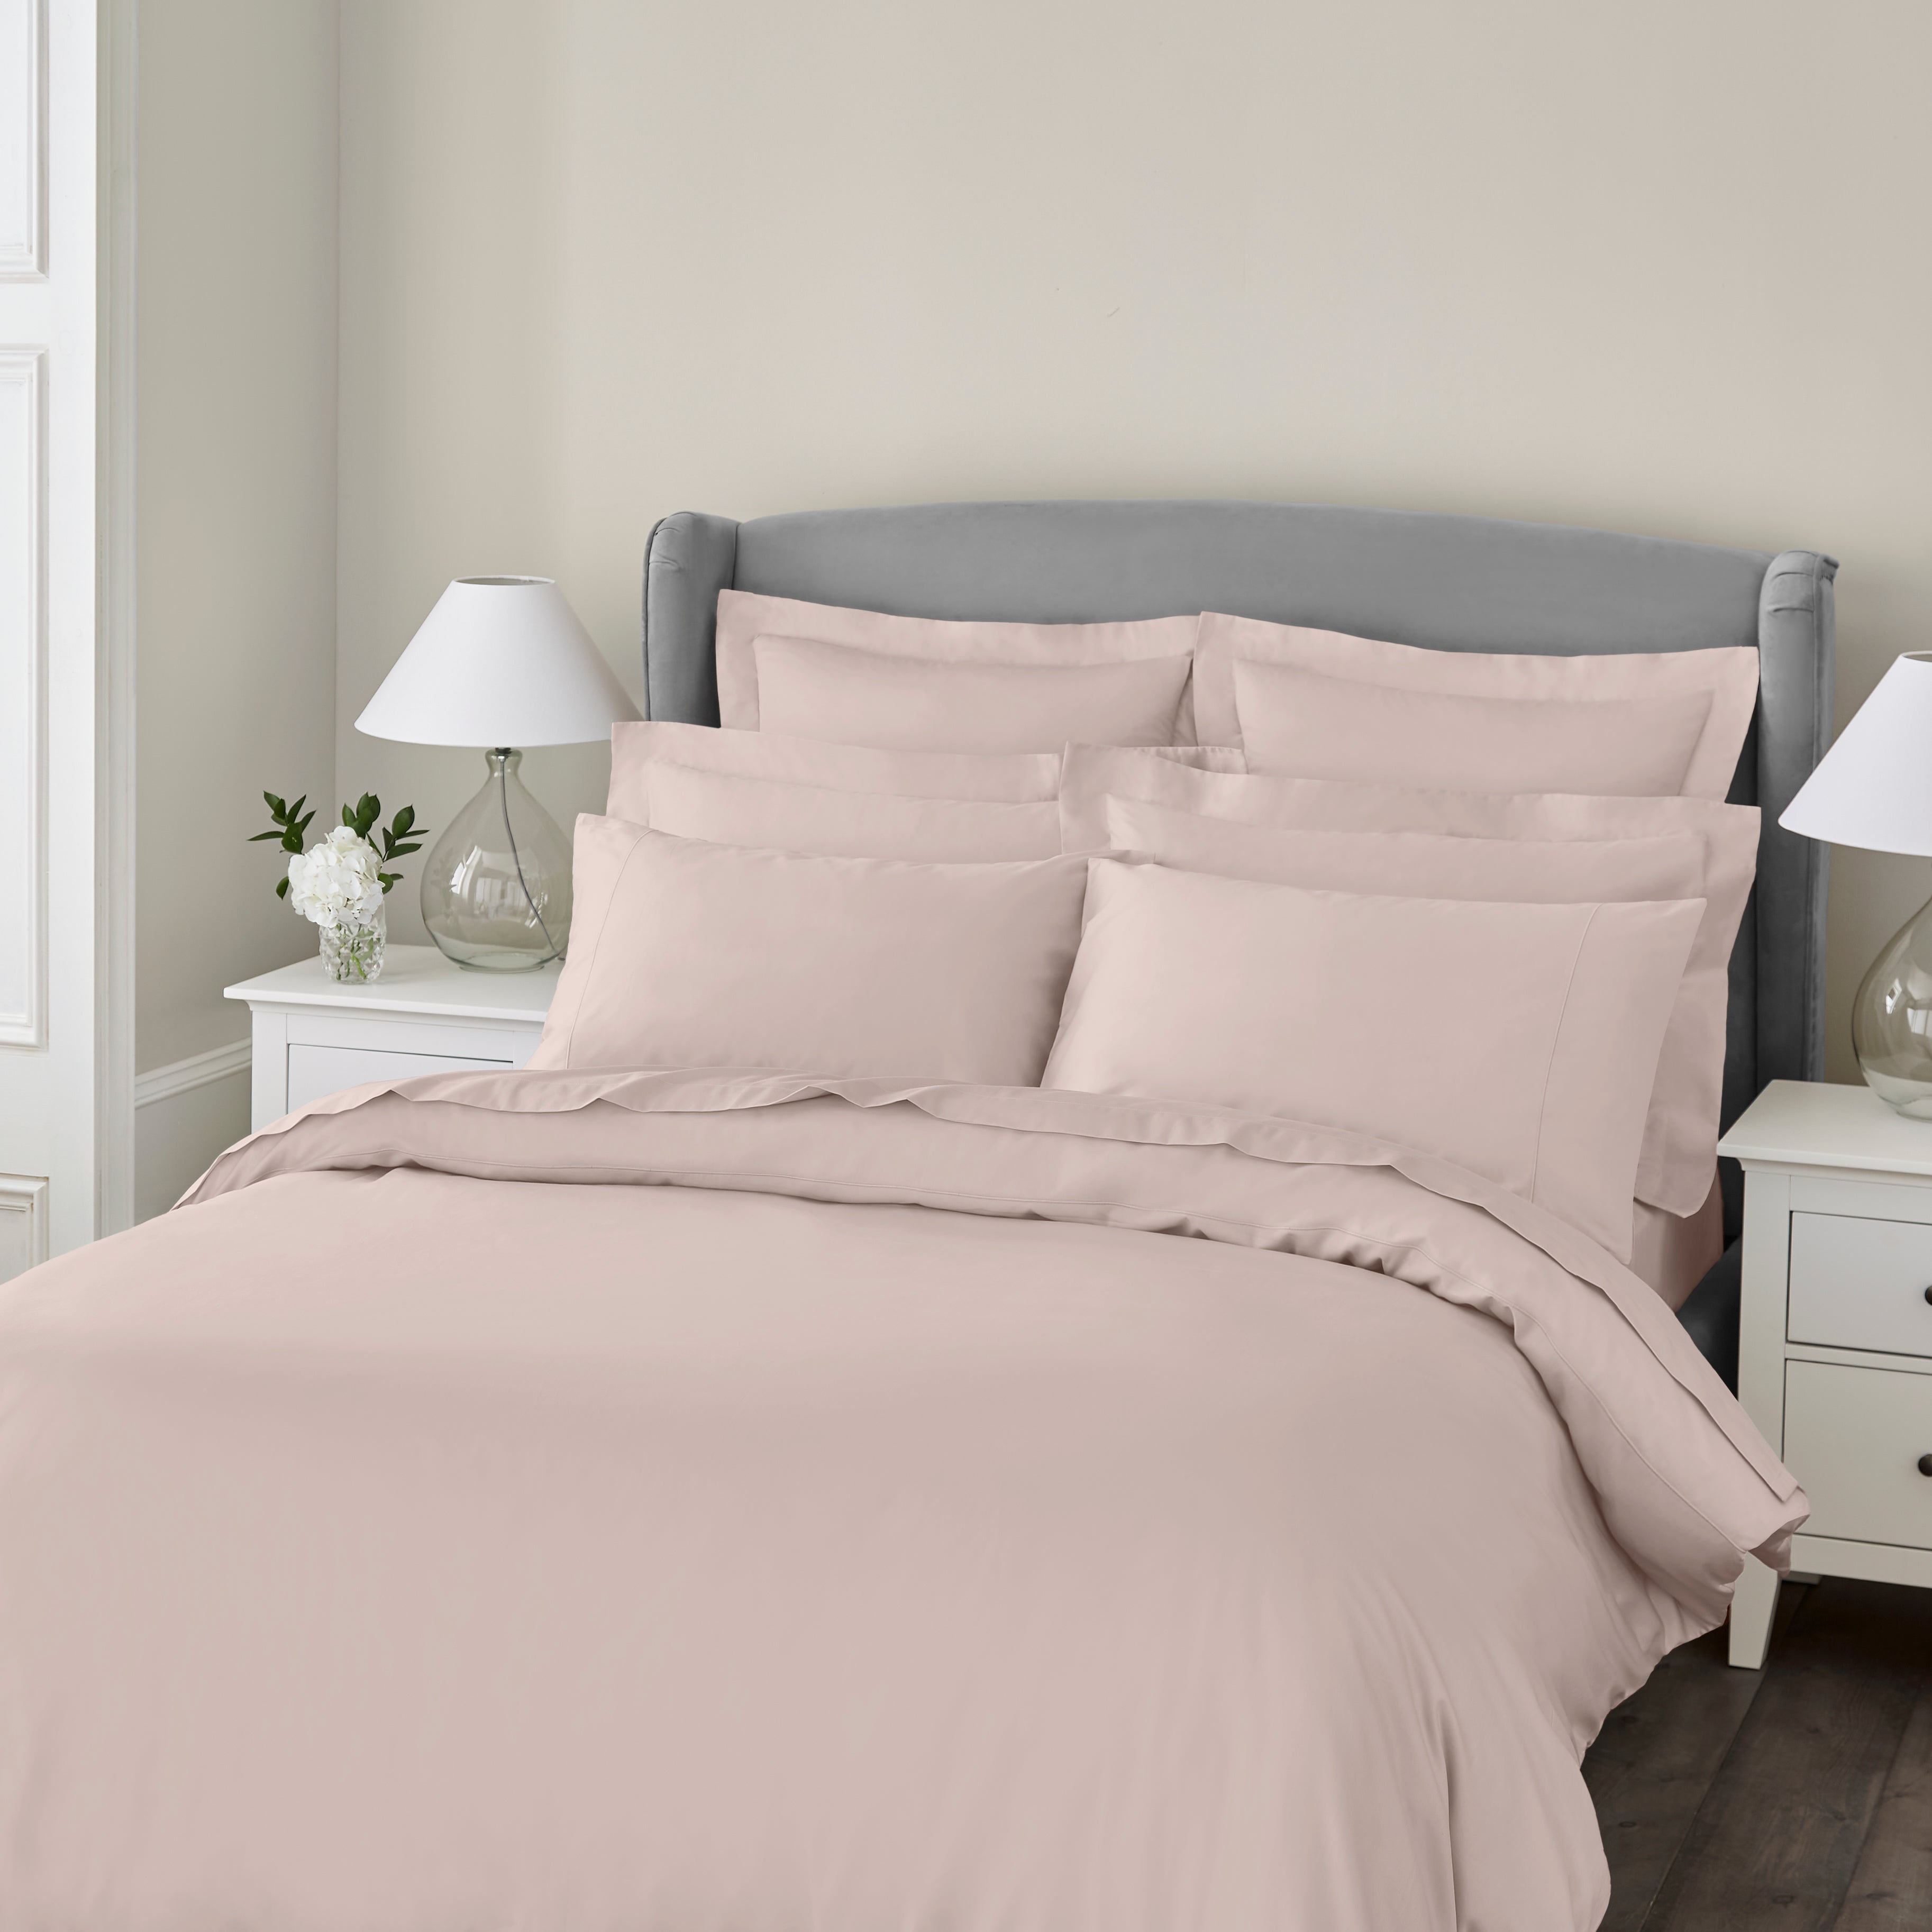 Dorma Egyptian Cotton 400 Thread Count Percale Duvet Cover Rose (Pink)